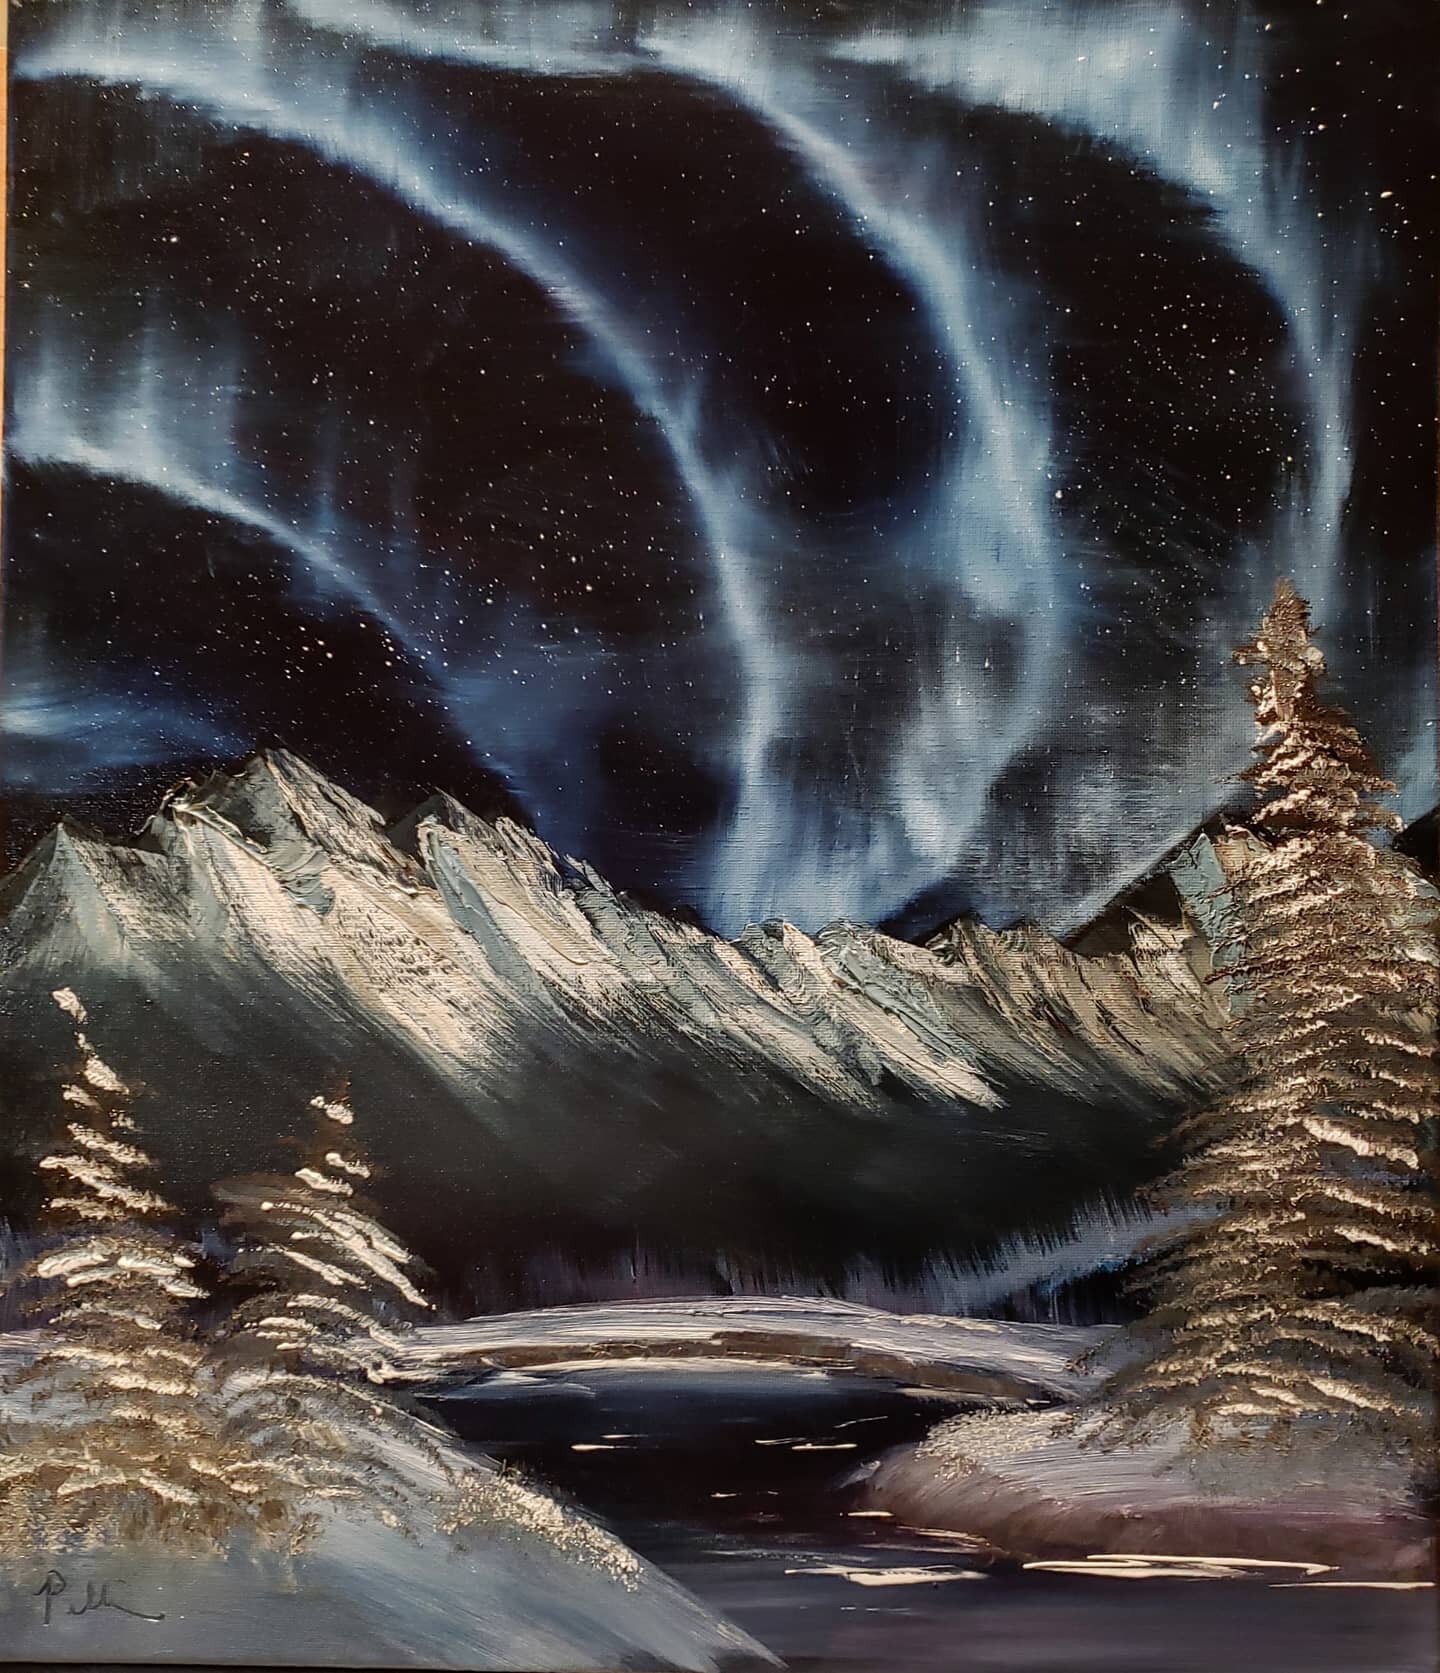 My first attempt at an Aurora! What do you think? I probably should have googled what Aurora's look like before painting this but I still think it looks cool 😂
Head over to @coastalcraftcircuit  on #Etsy for more! .
.
.
.
#handmade #painting #bobros